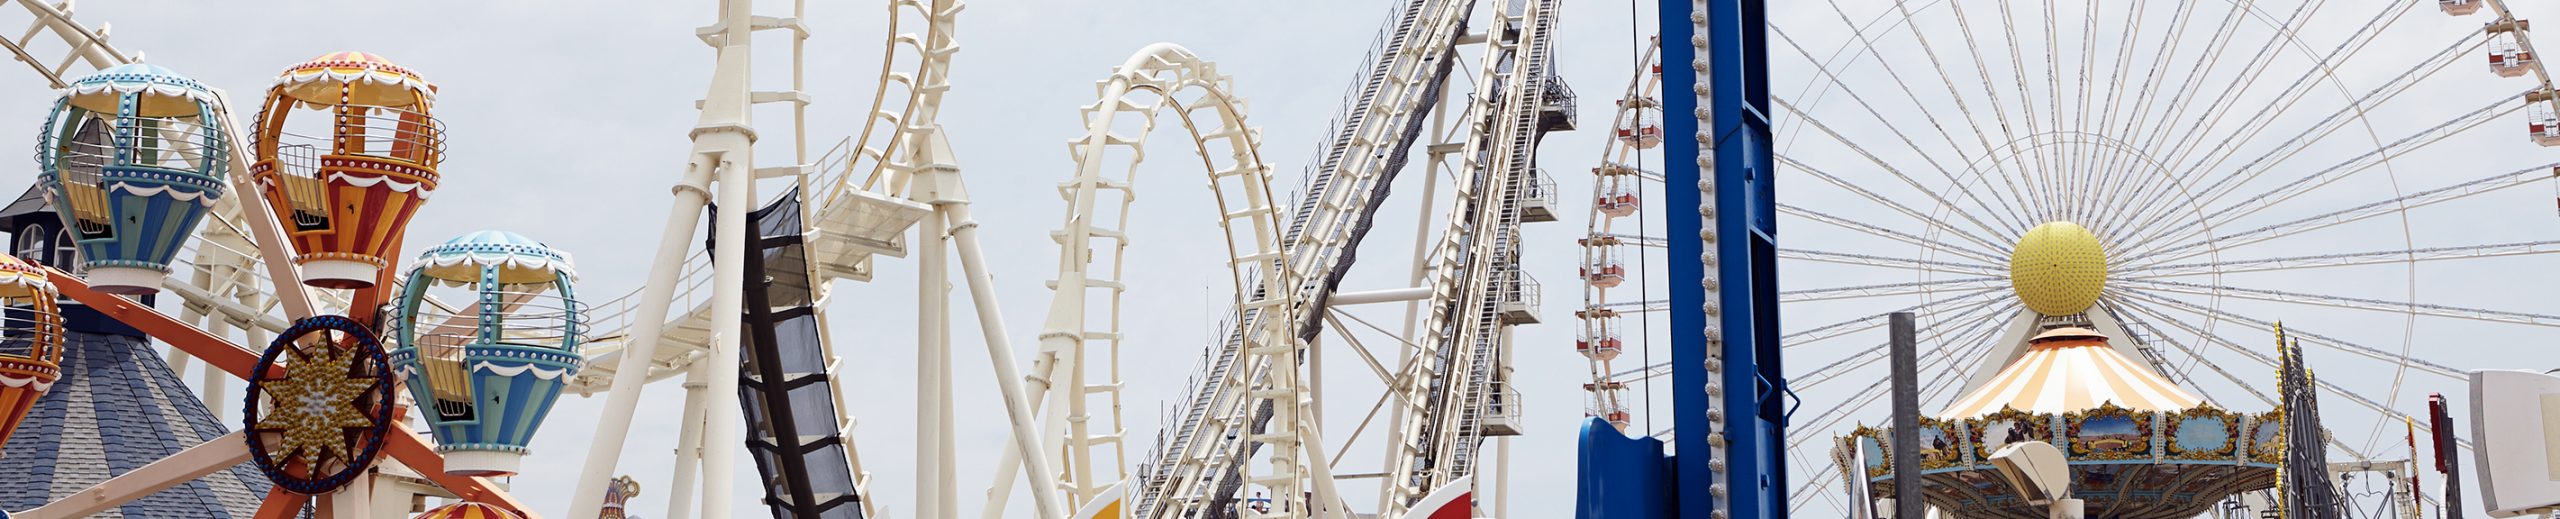 What to do after an injury at an amusement park